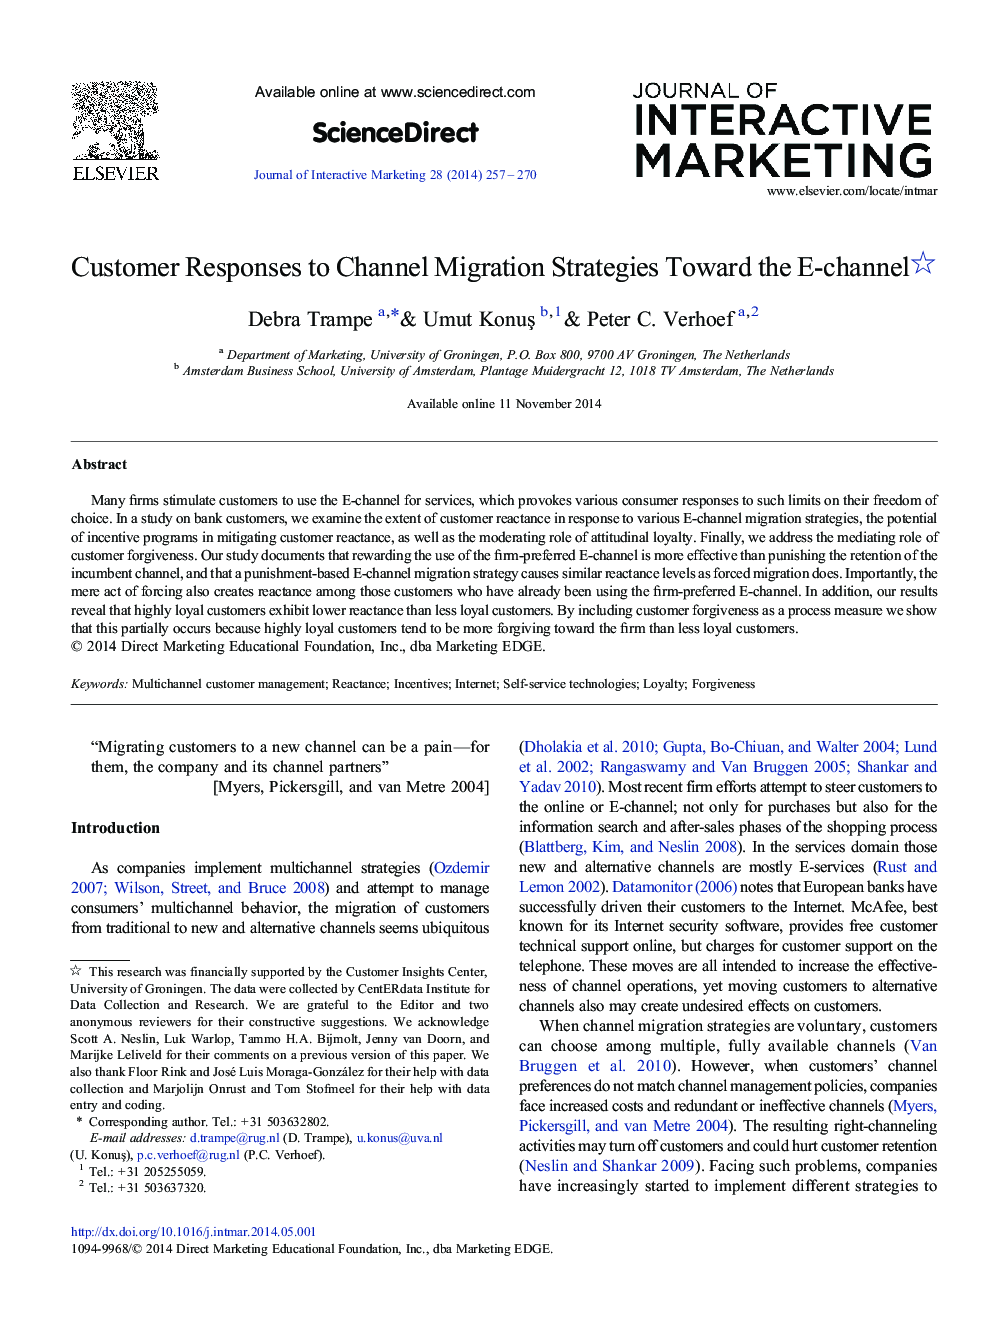 Customer Responses to Channel Migration Strategies Toward the E-channel 